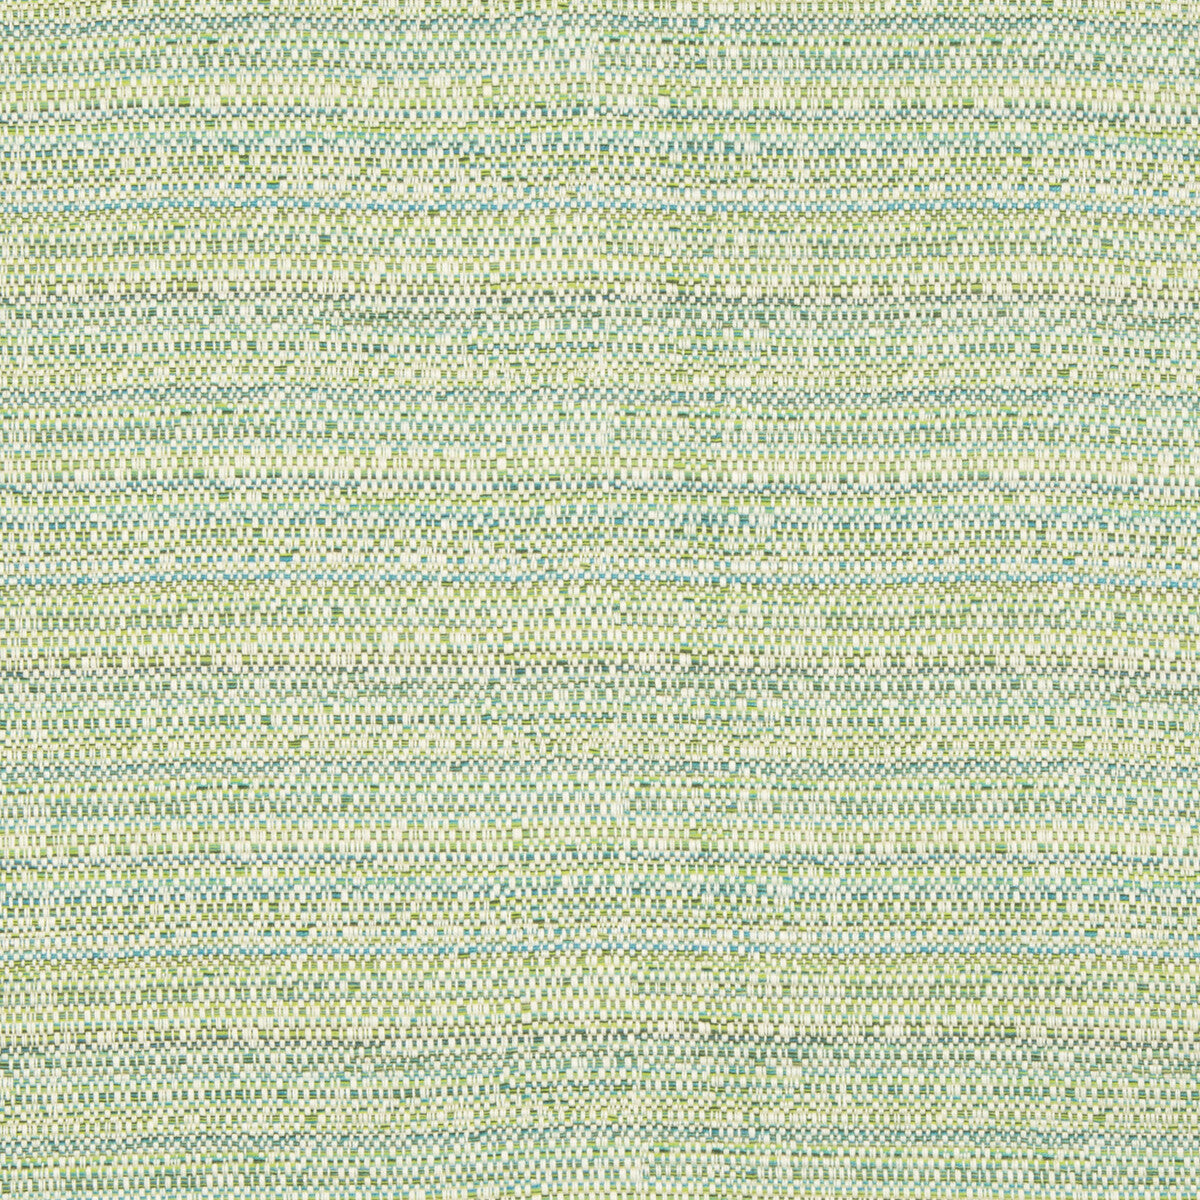 Melanger fabric in seaglass color - pattern 31695.3.0 - by Kravet Couture in the Echo Indoor Outdoor Ibiza collection